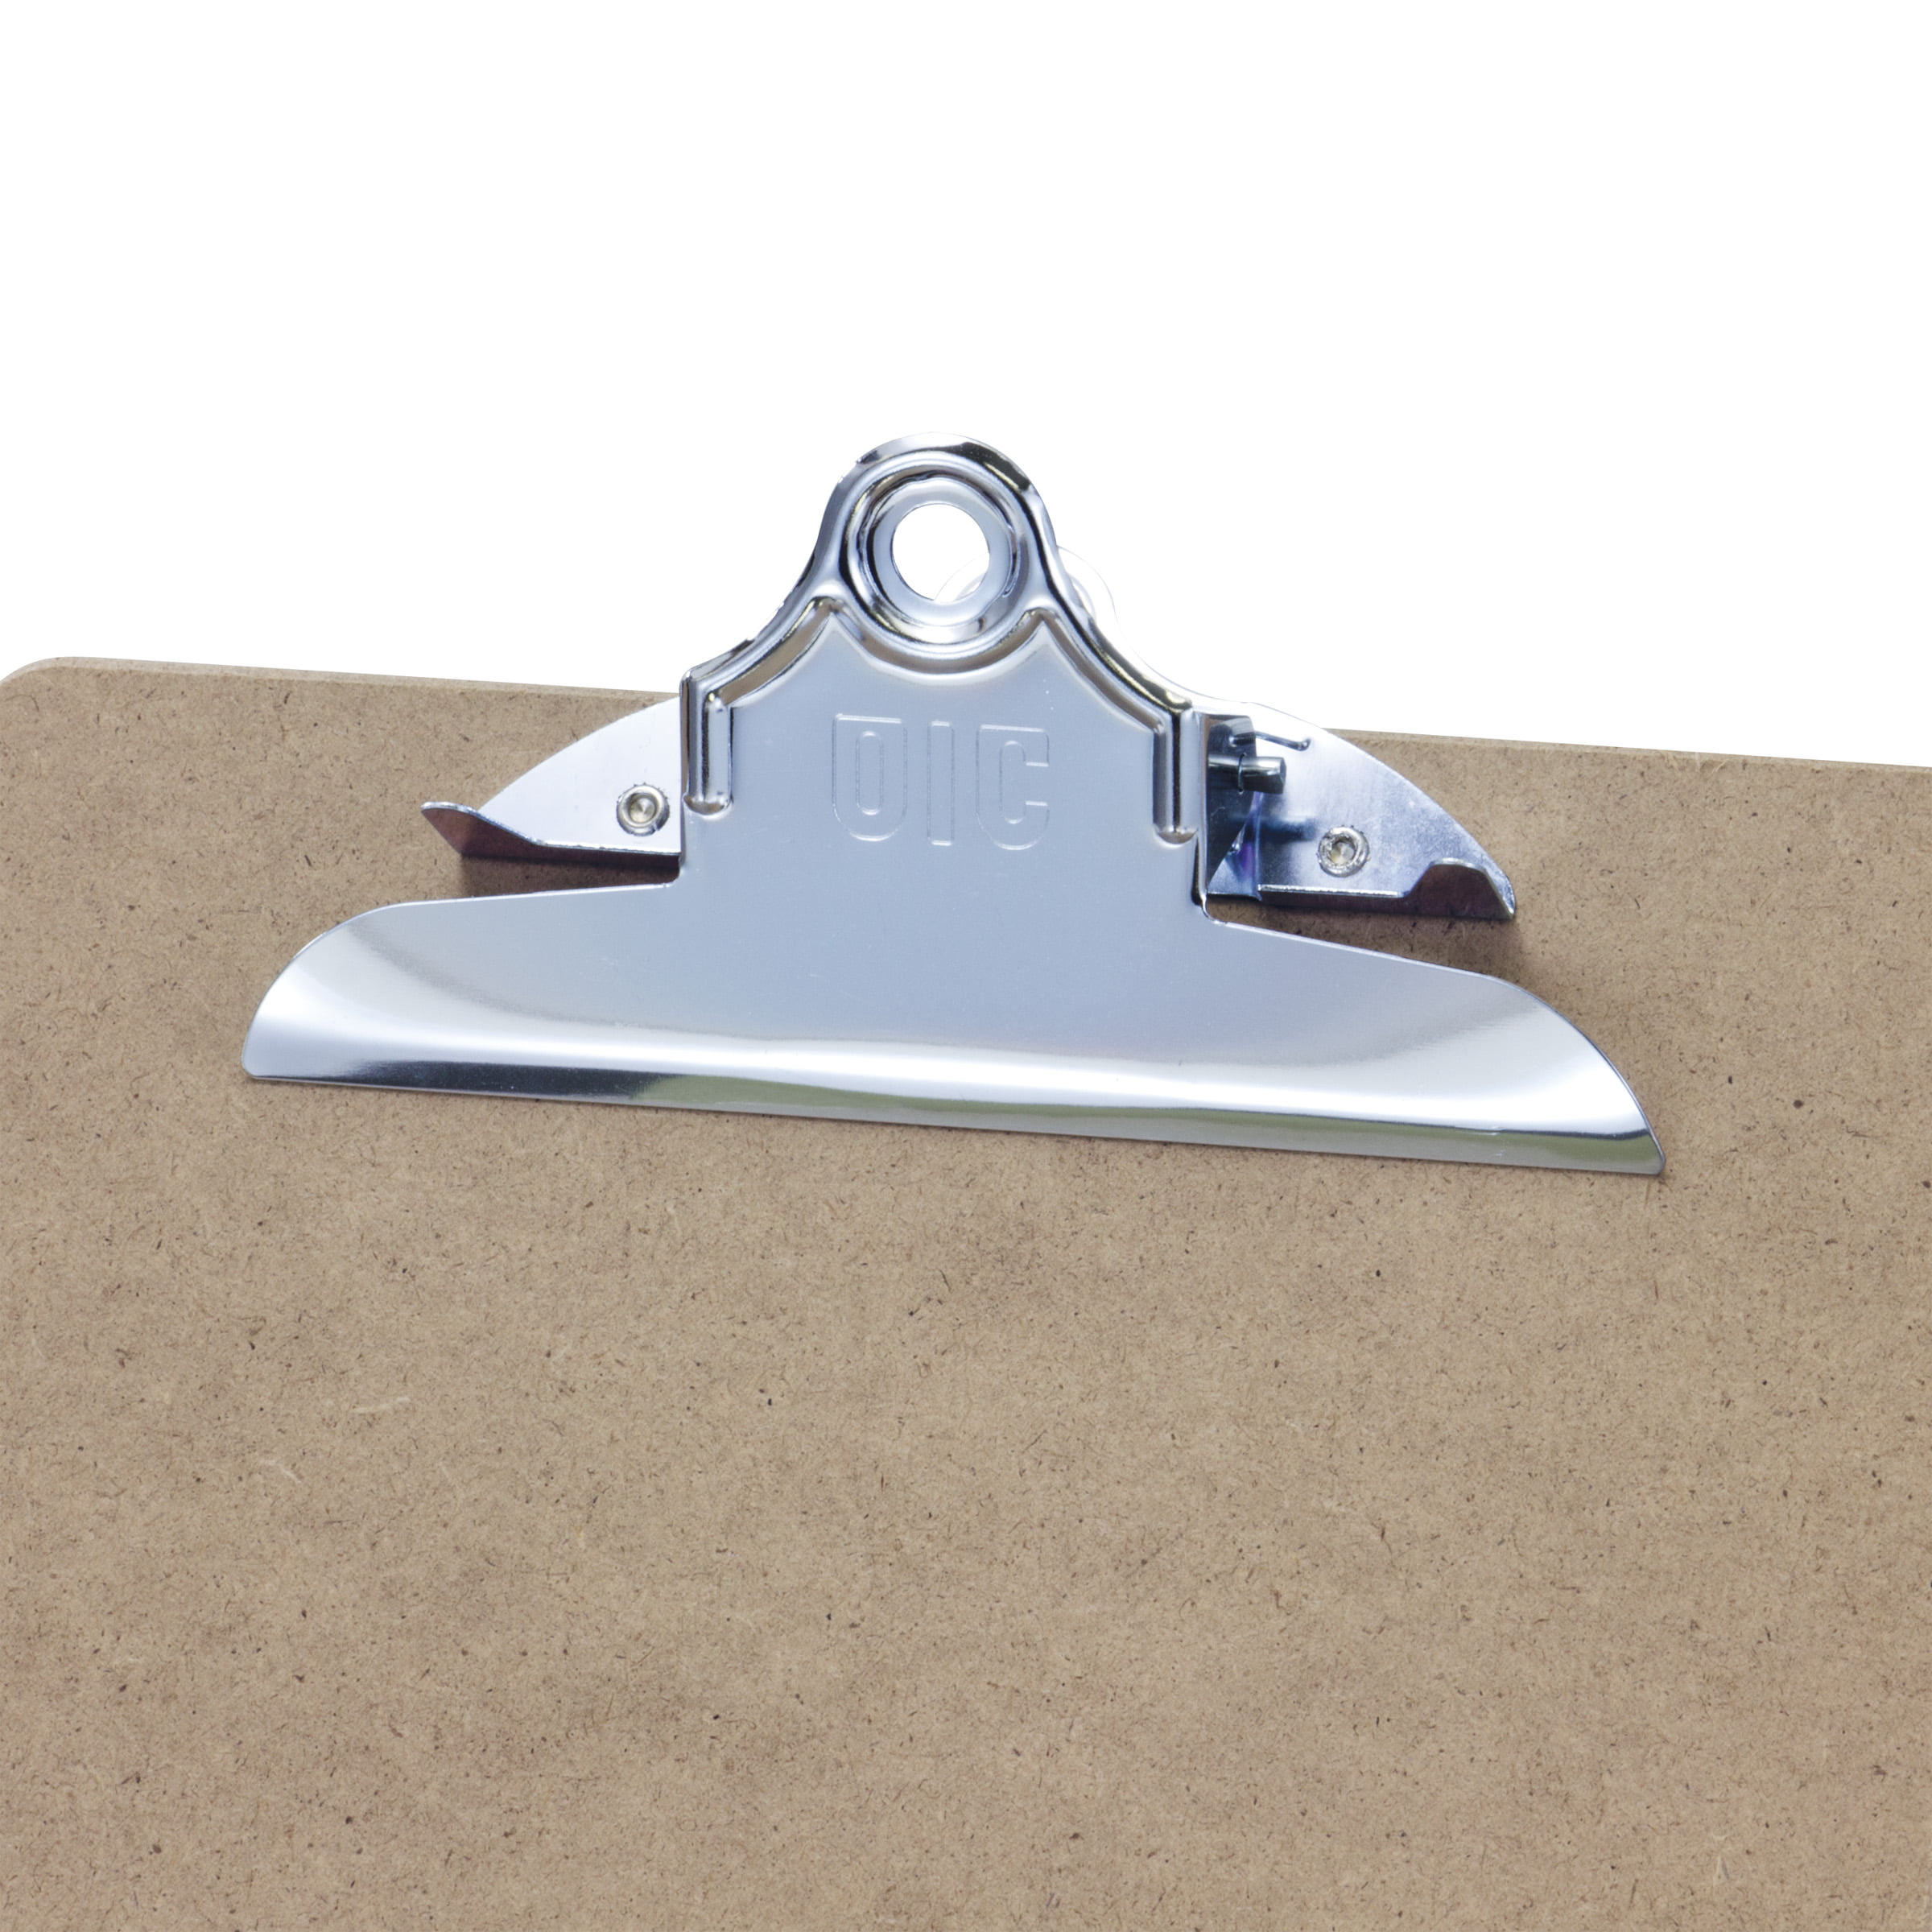 Letter Size 3 Pack Officemate Clipboard 83130